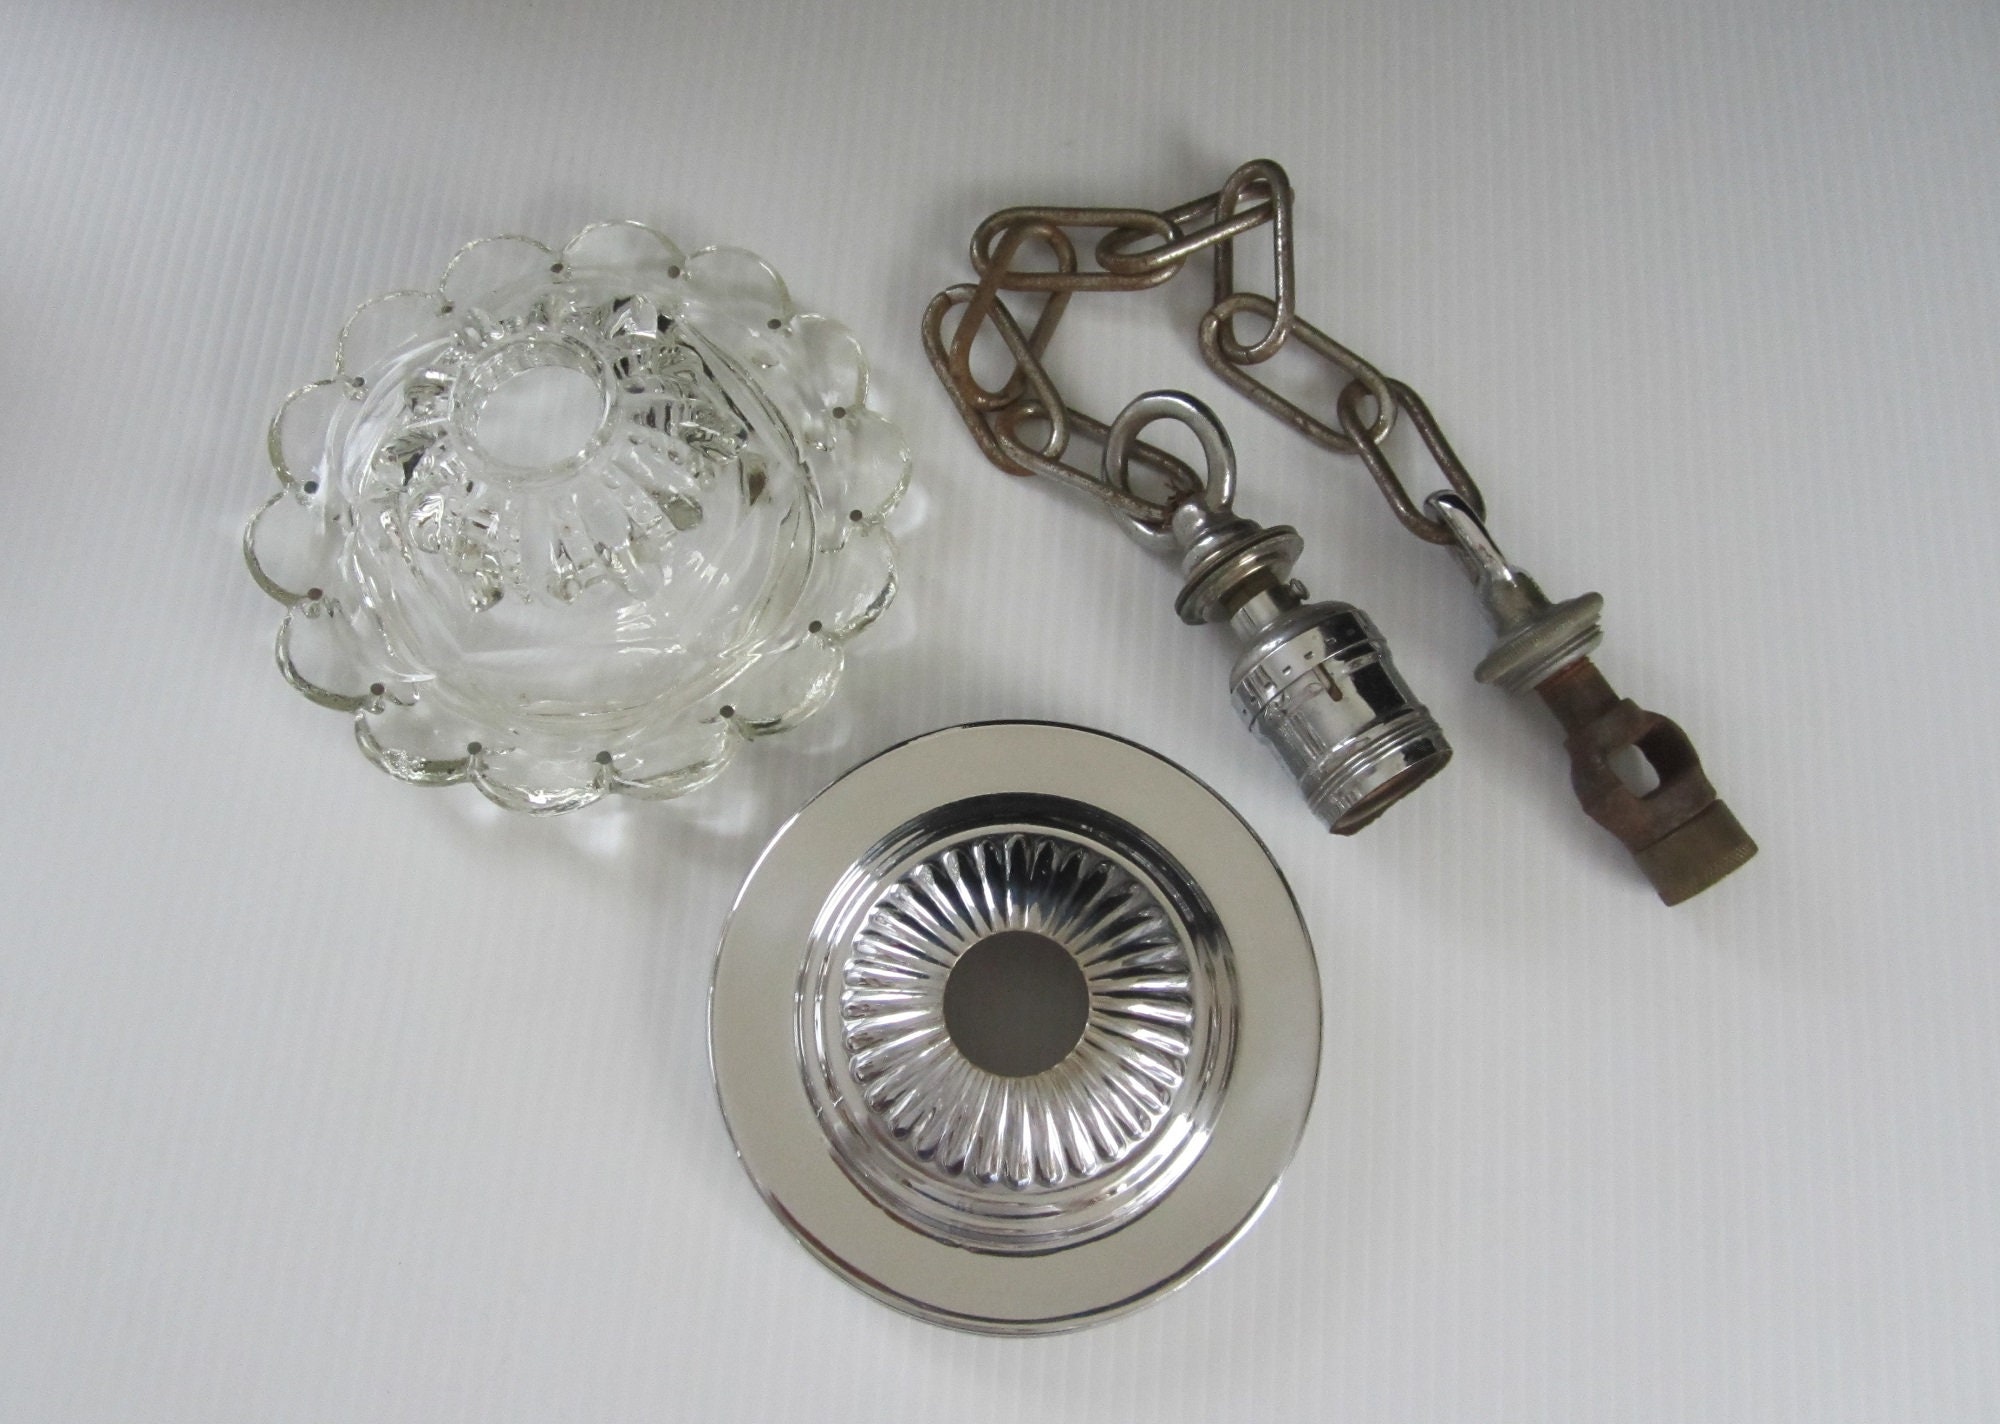 Metal Chandelier Parts: Candle Cups, Bobeches, Ornaments